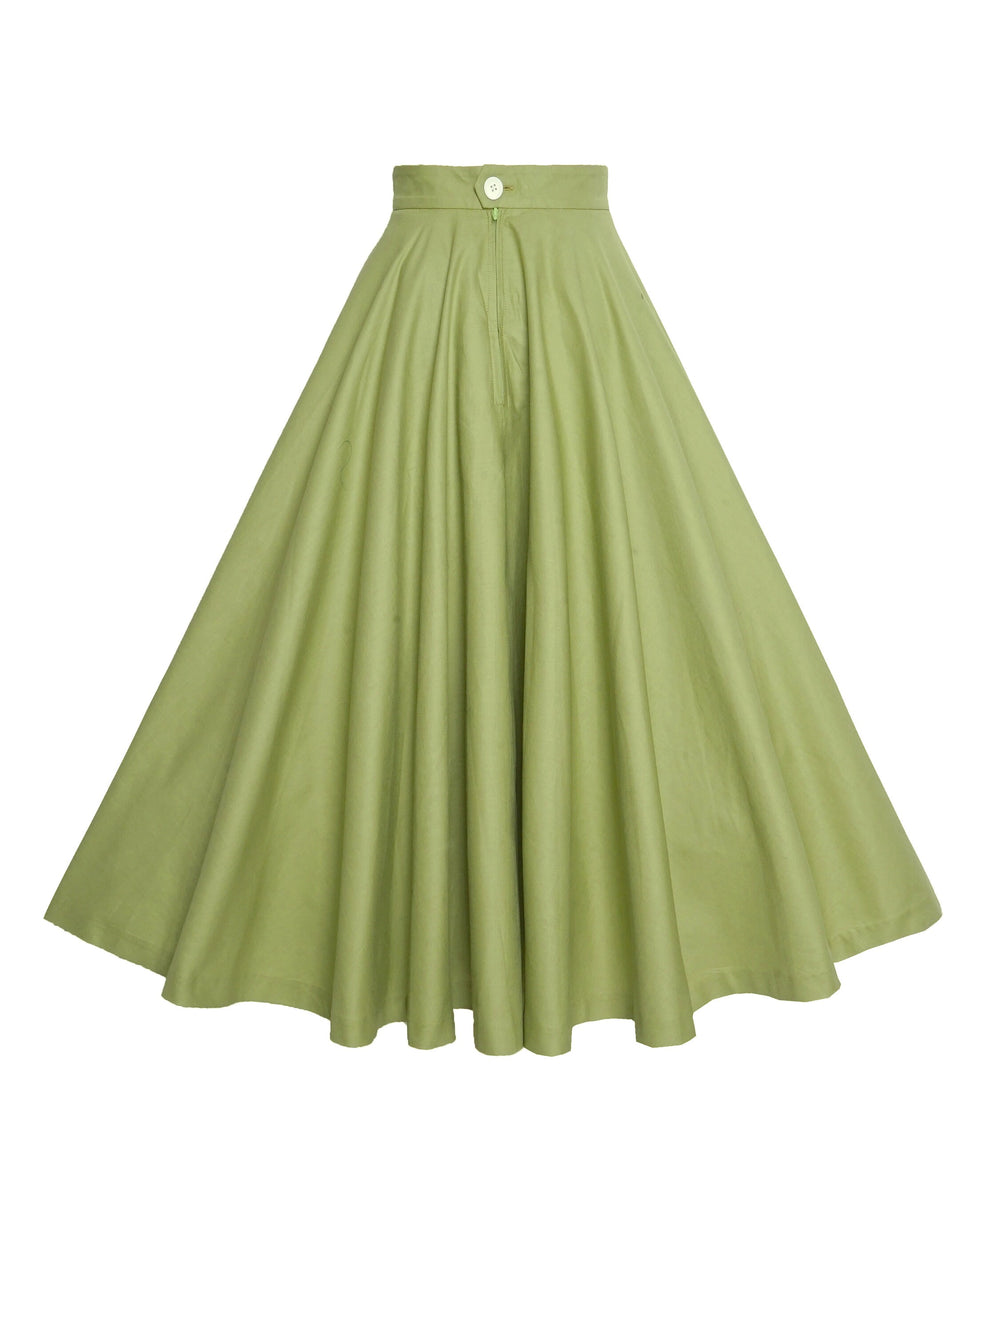 RTS - Size XL - Lindy Skirt in Matcha Green Cotton